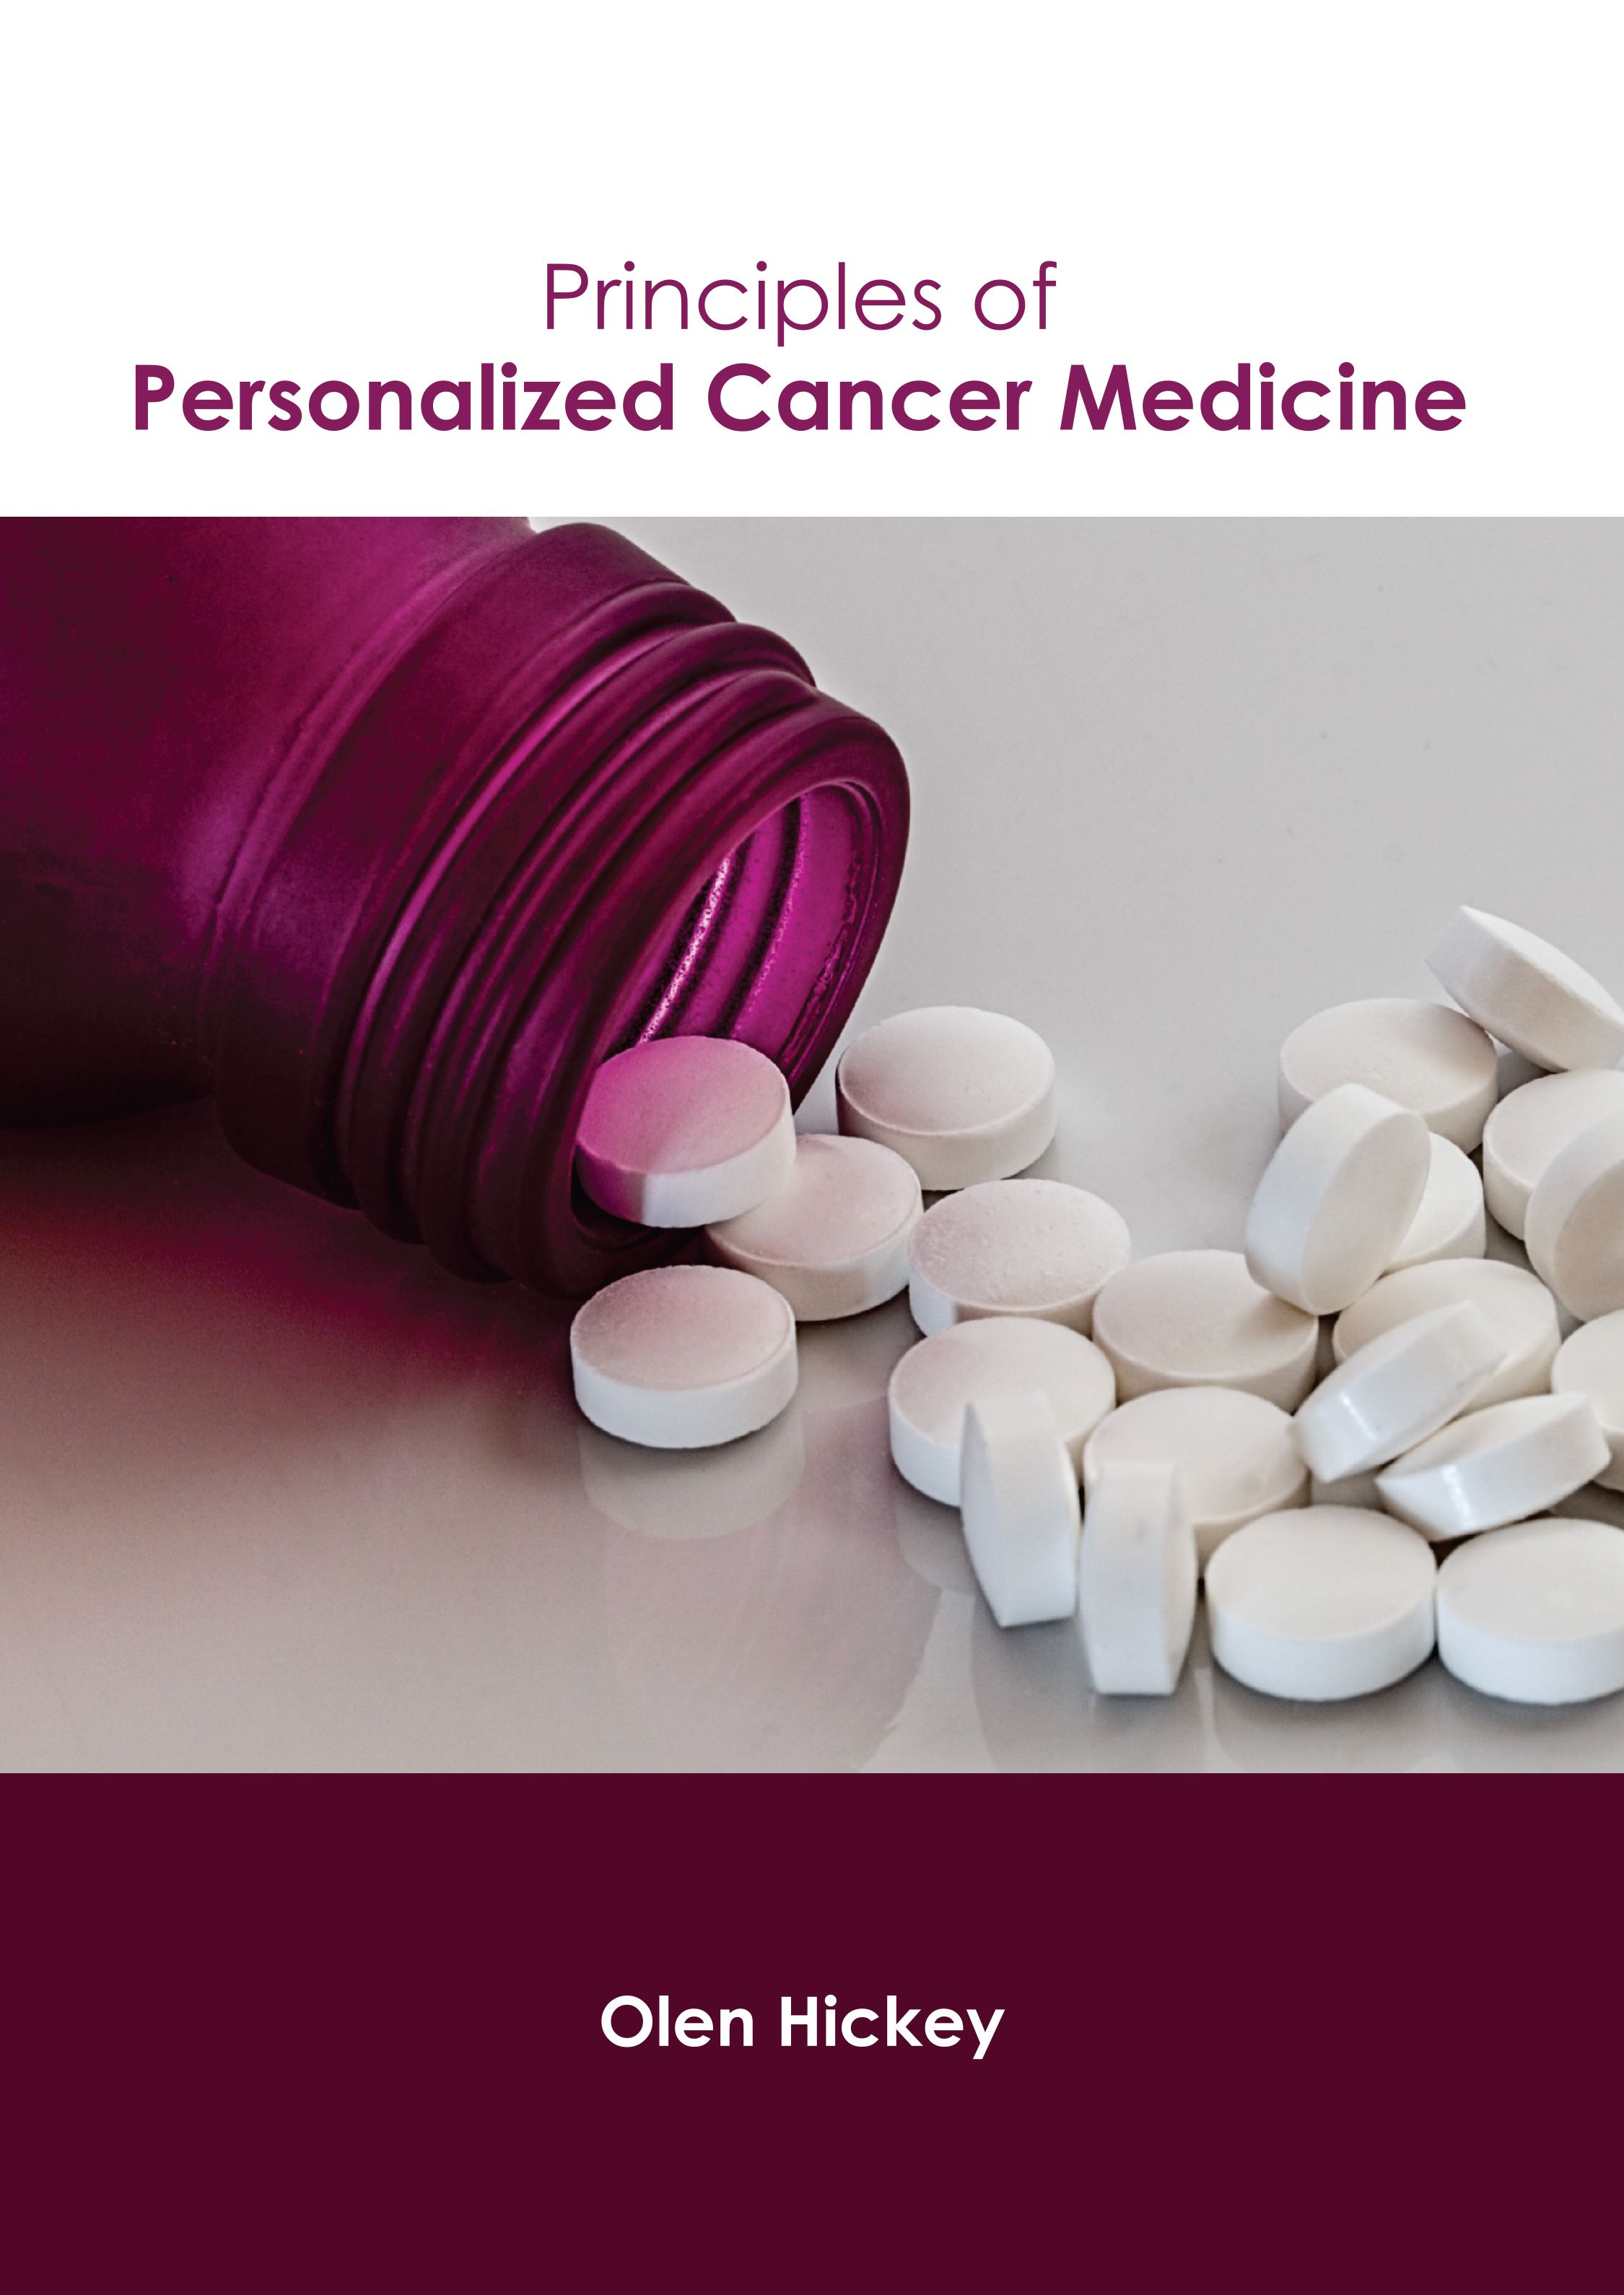 exclusive-publishers/american-medical-publishers/principles-of-personalized-cancer-medicine-9798887403915